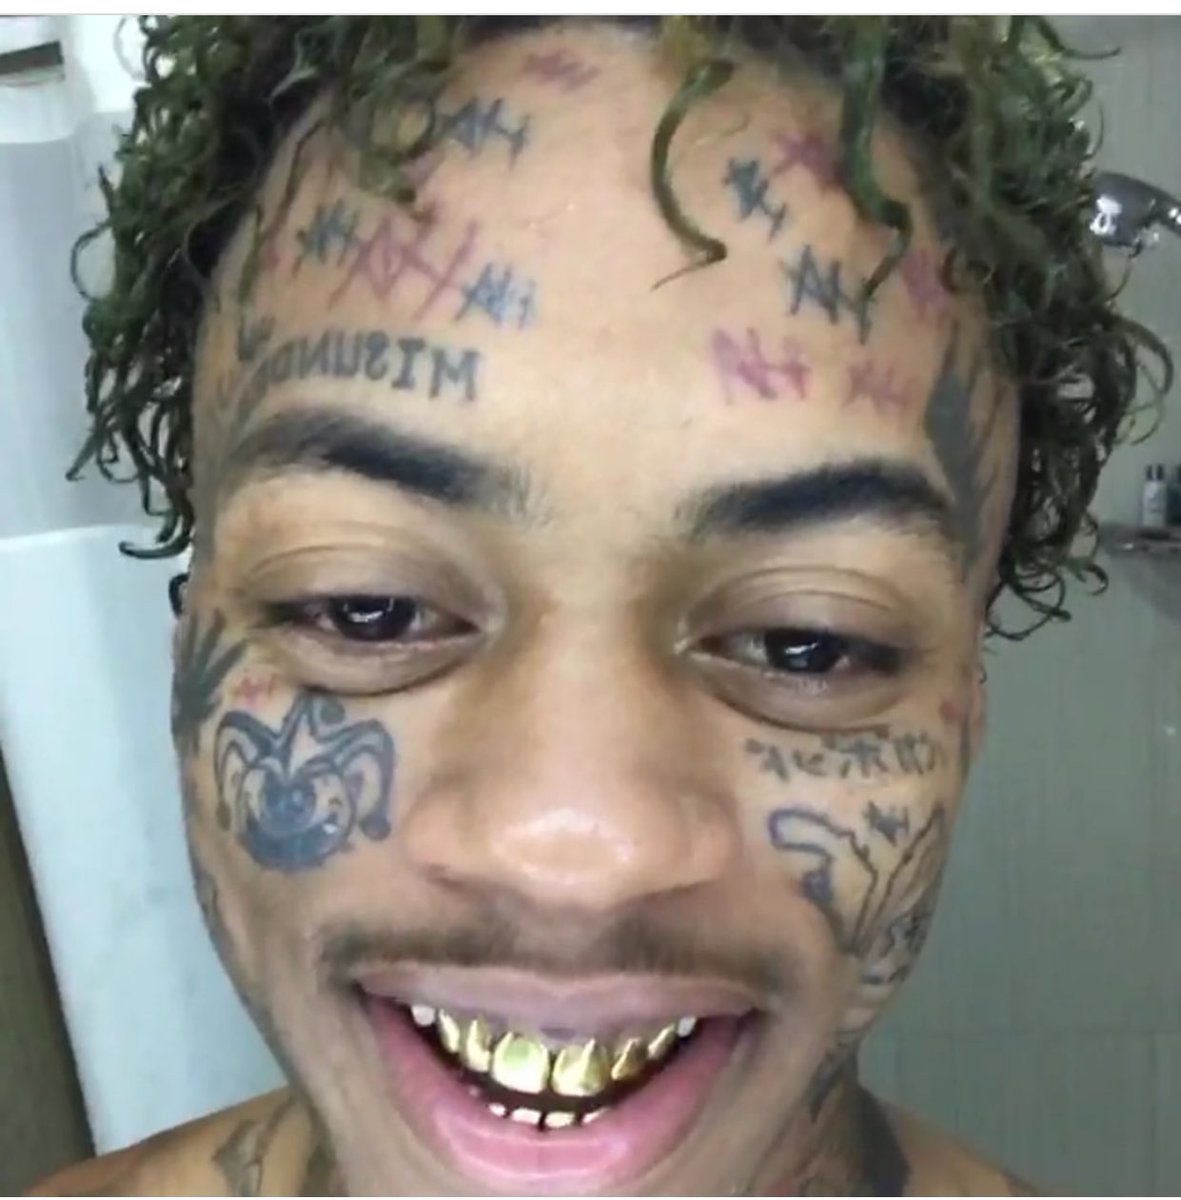 Boonk, what were you thinking man? Oh, that's right you weren't, because no one with any sense in their brain would get such shitty tattoos on their face. 